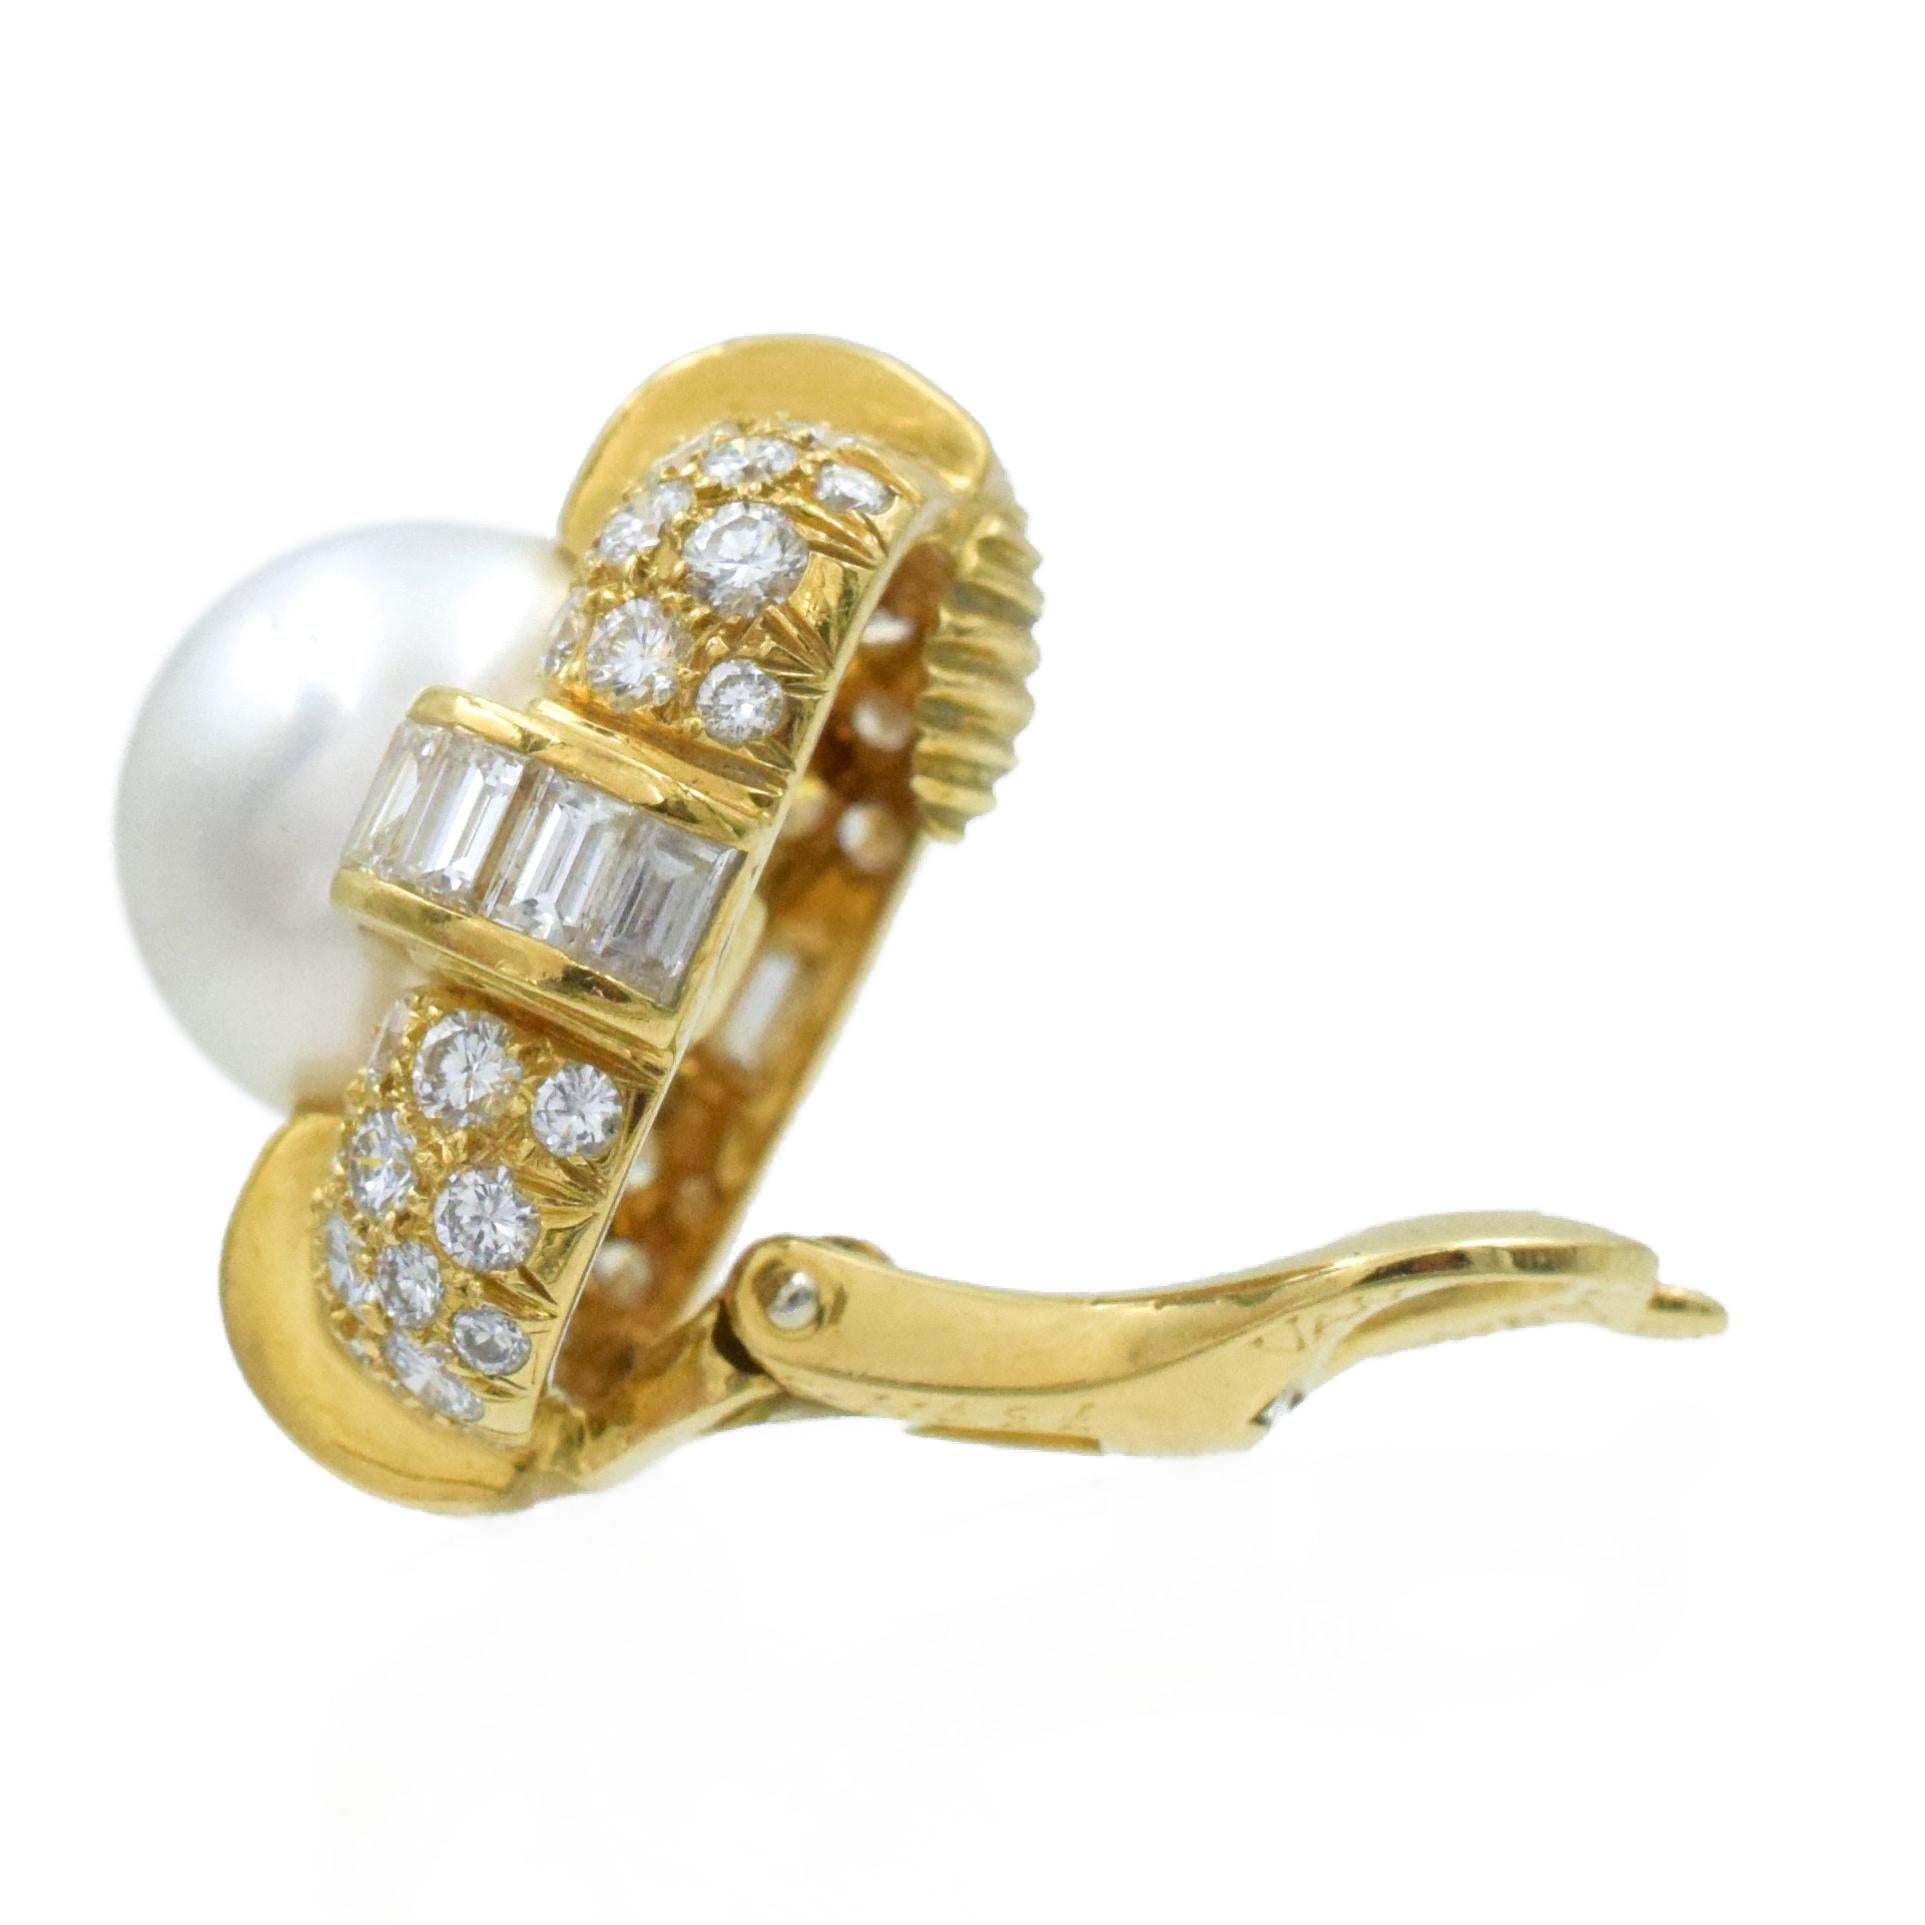 Artist Van Cleef & Arpels South Sea Cultured Pearl and Diamond Ear-Clips